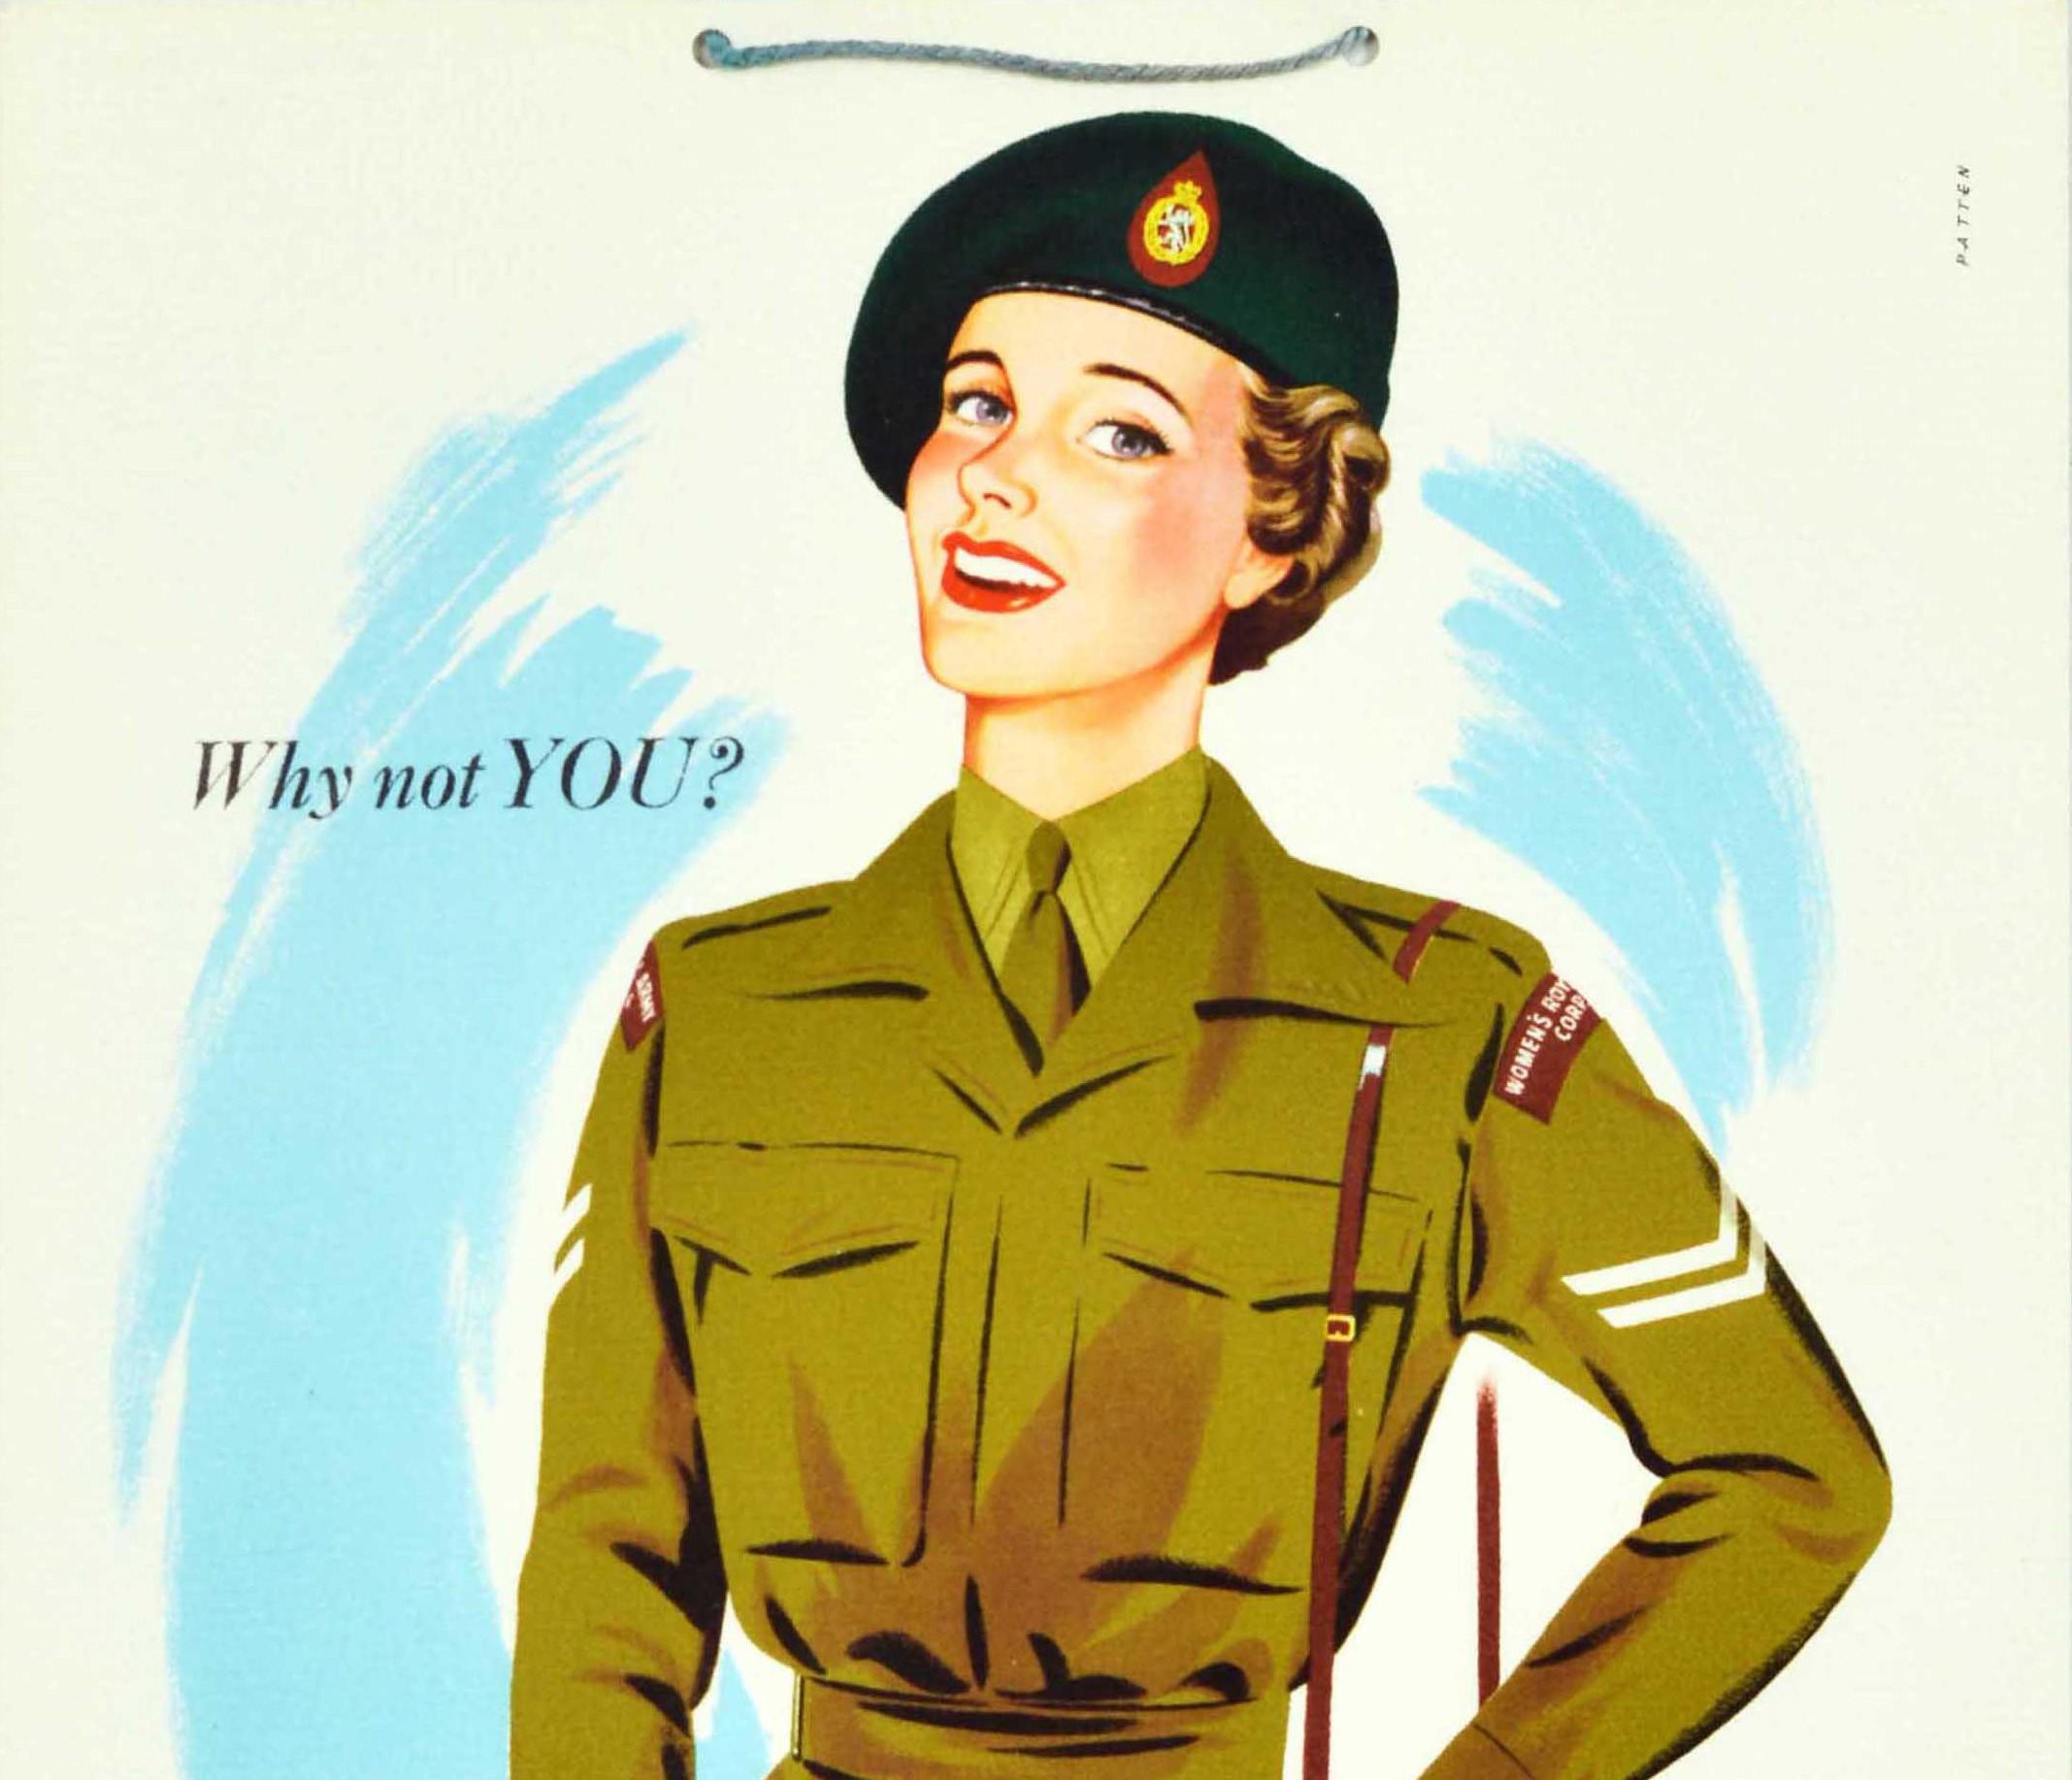 Original Vintage Poster Why Not You Women's Royal Army Corps Territorial Army - Print by Patten